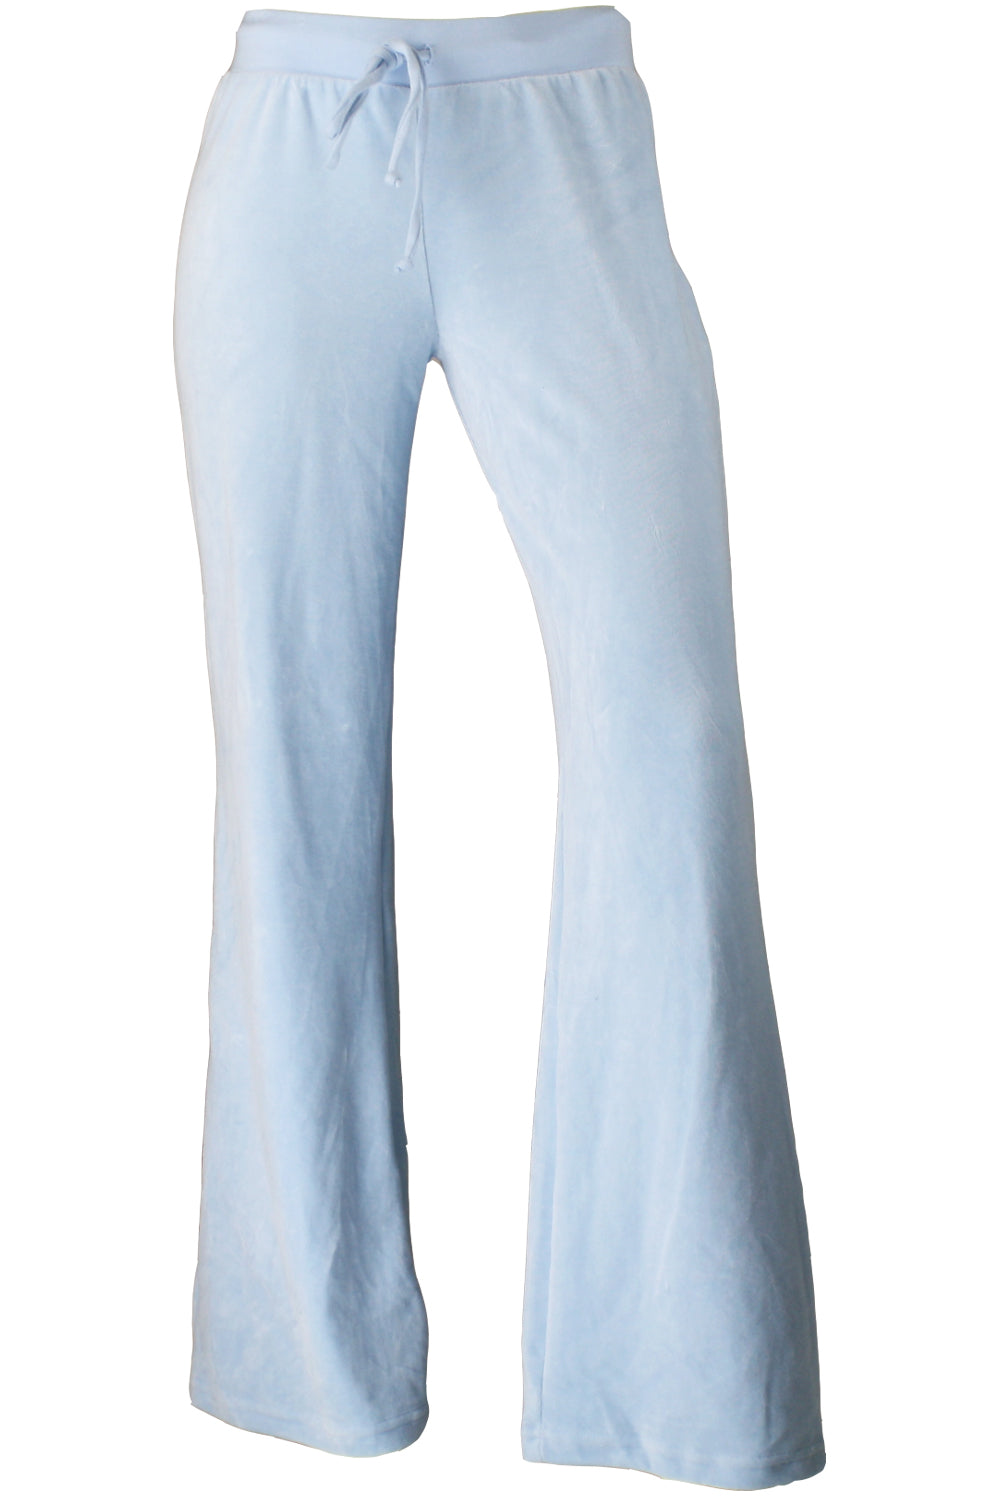 Code by Lifestyle Light Blue Regular Fit Trousers